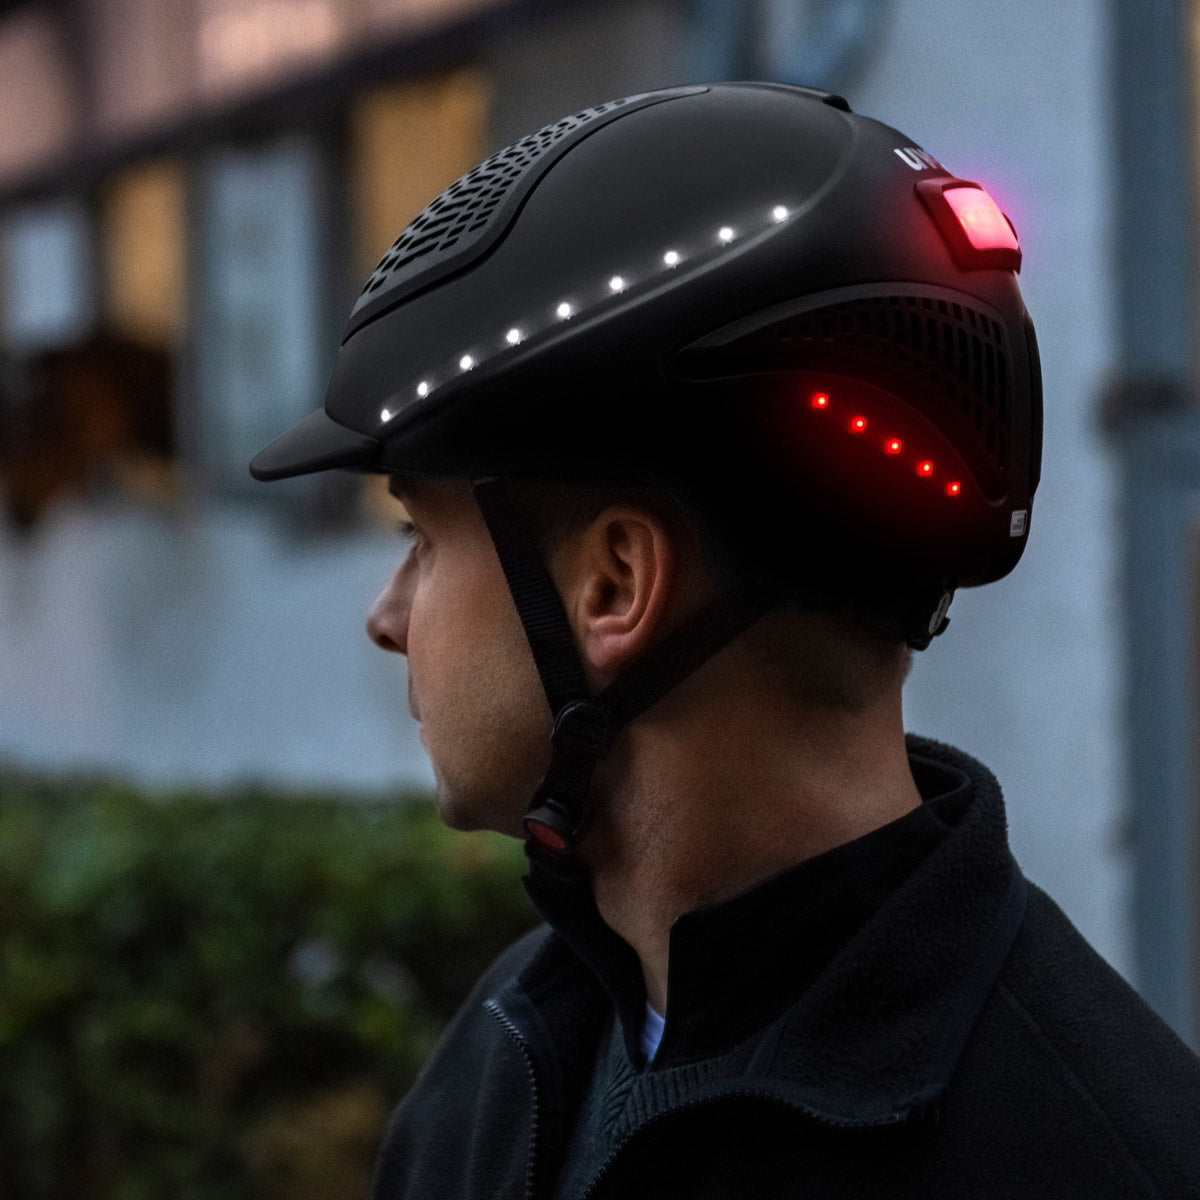 UVEX exxential II LED Riding Hat - black